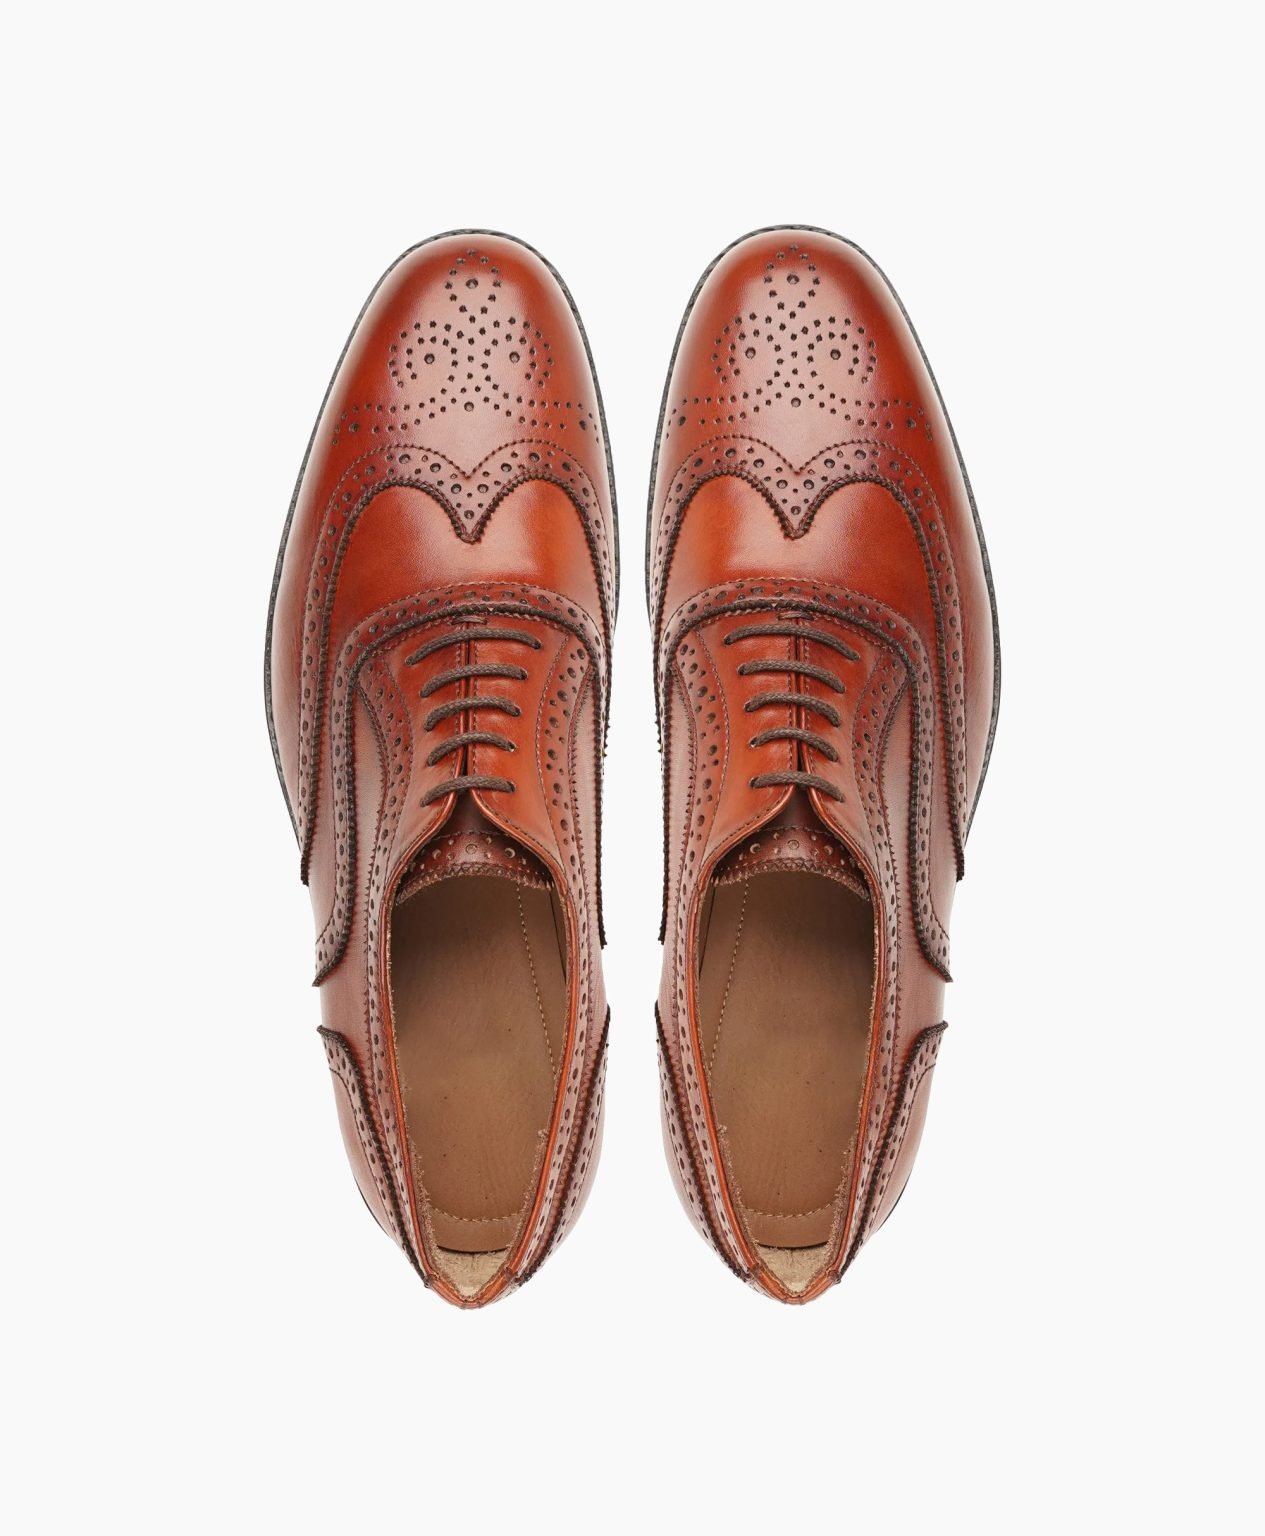 allerdale-oxford-orange-tan-leather-shoes-image202